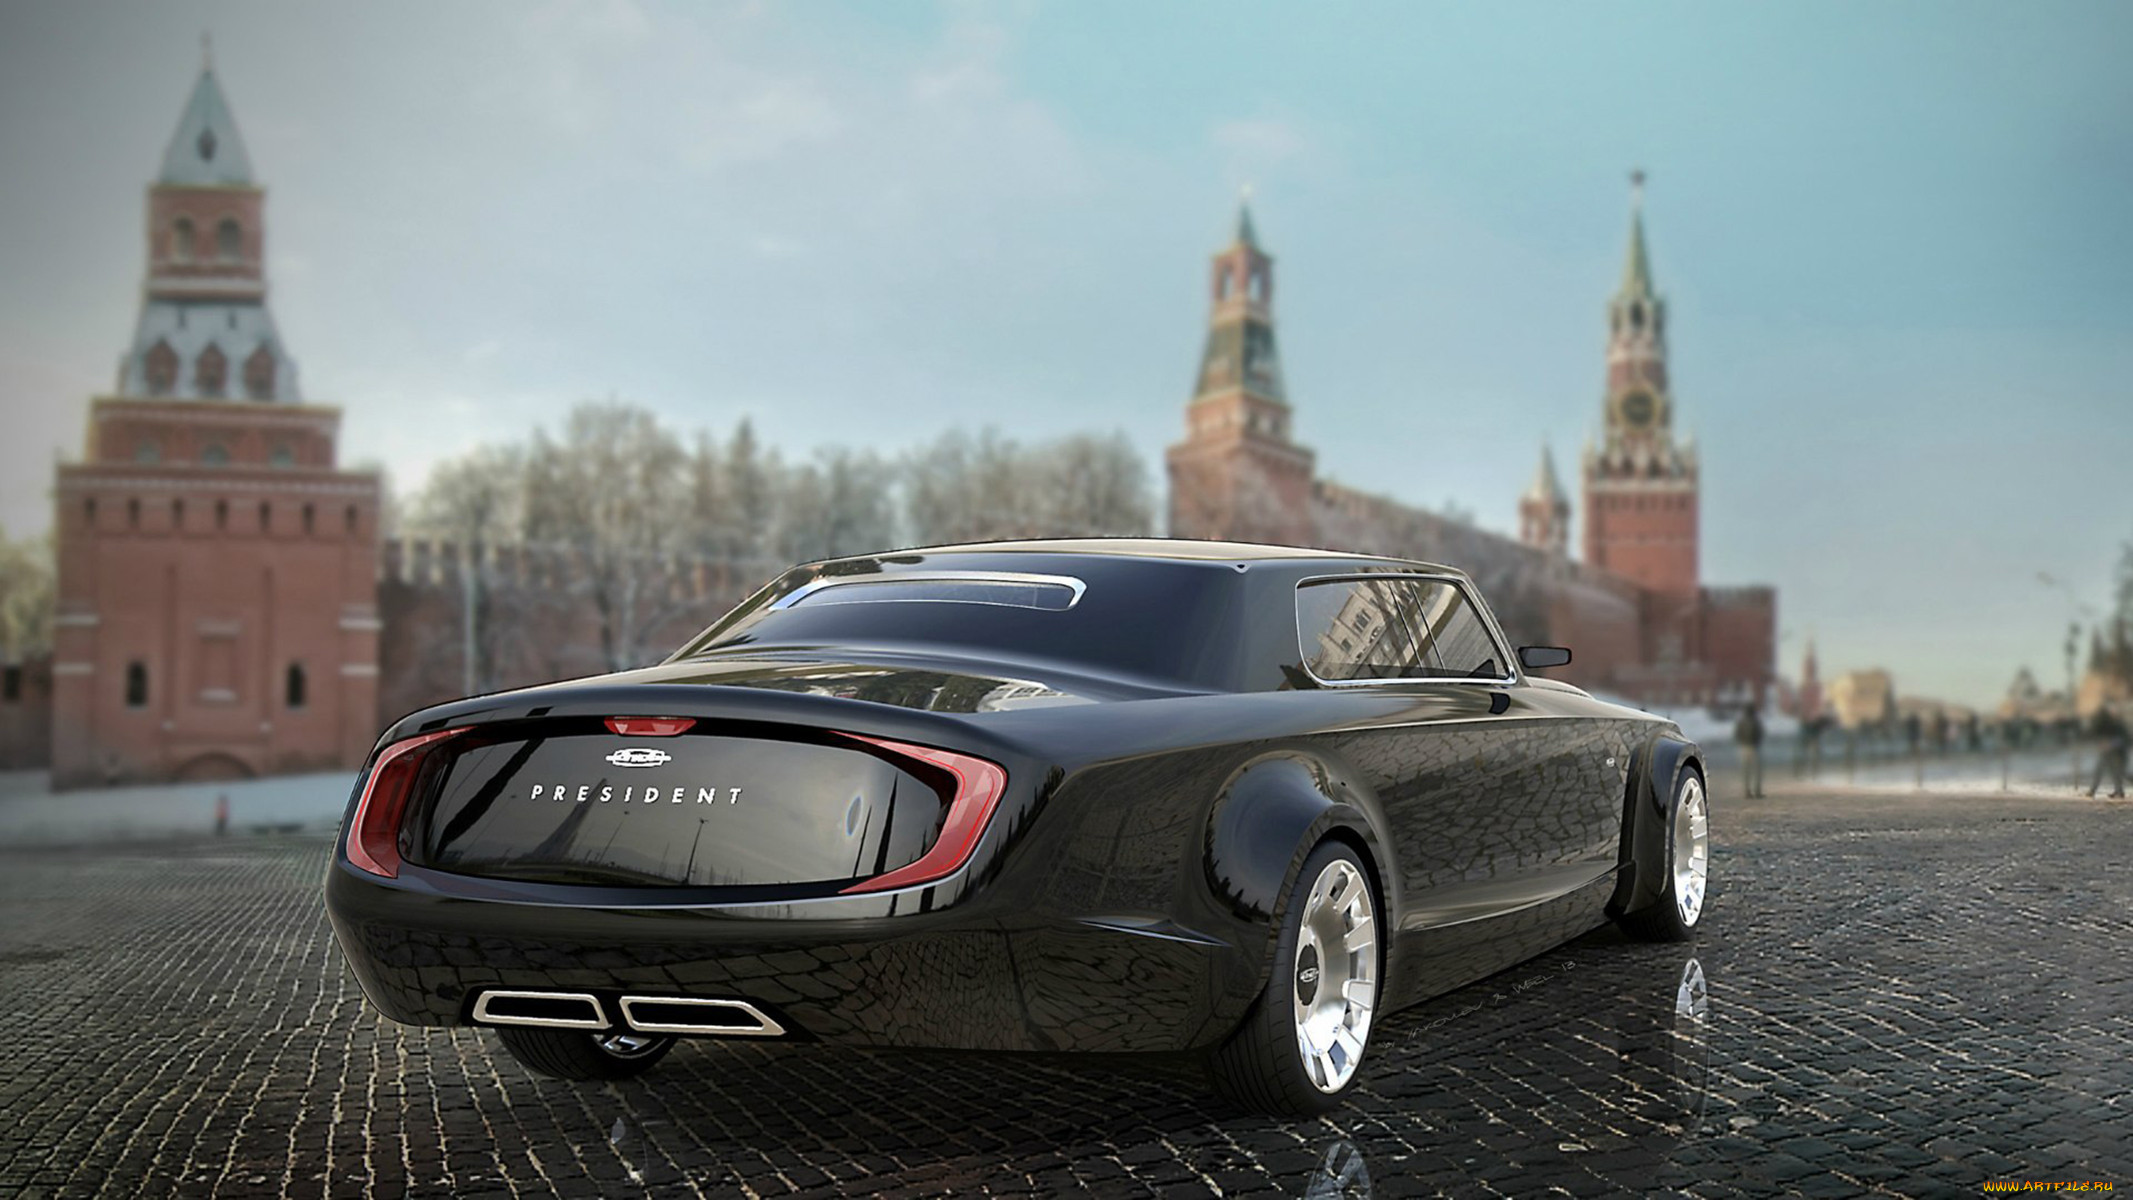 zil presidential limo concept, , 3, presidential, zil, 3d, concept, limo